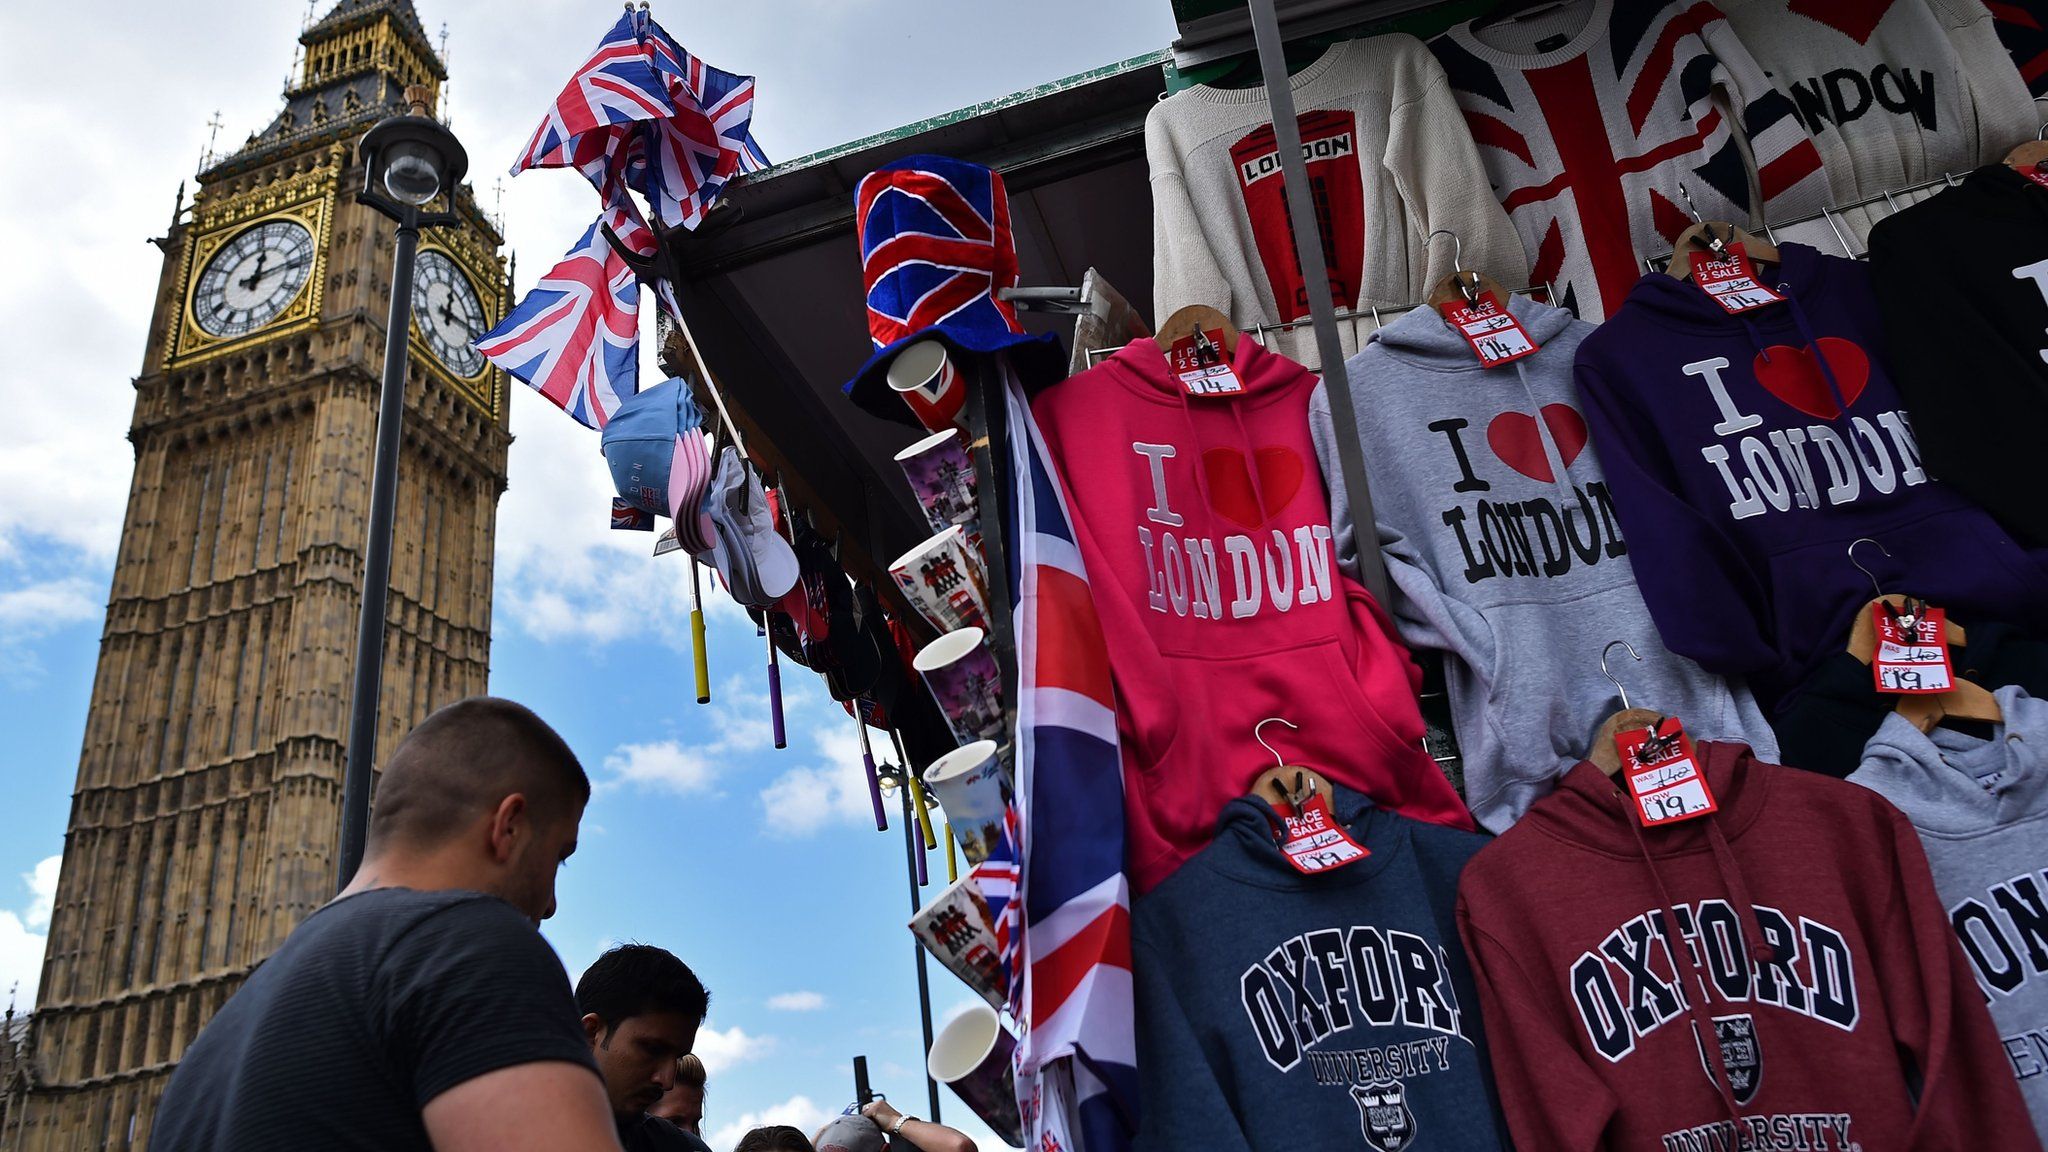 Tourists look at London themed merchandise with Big Ben in background